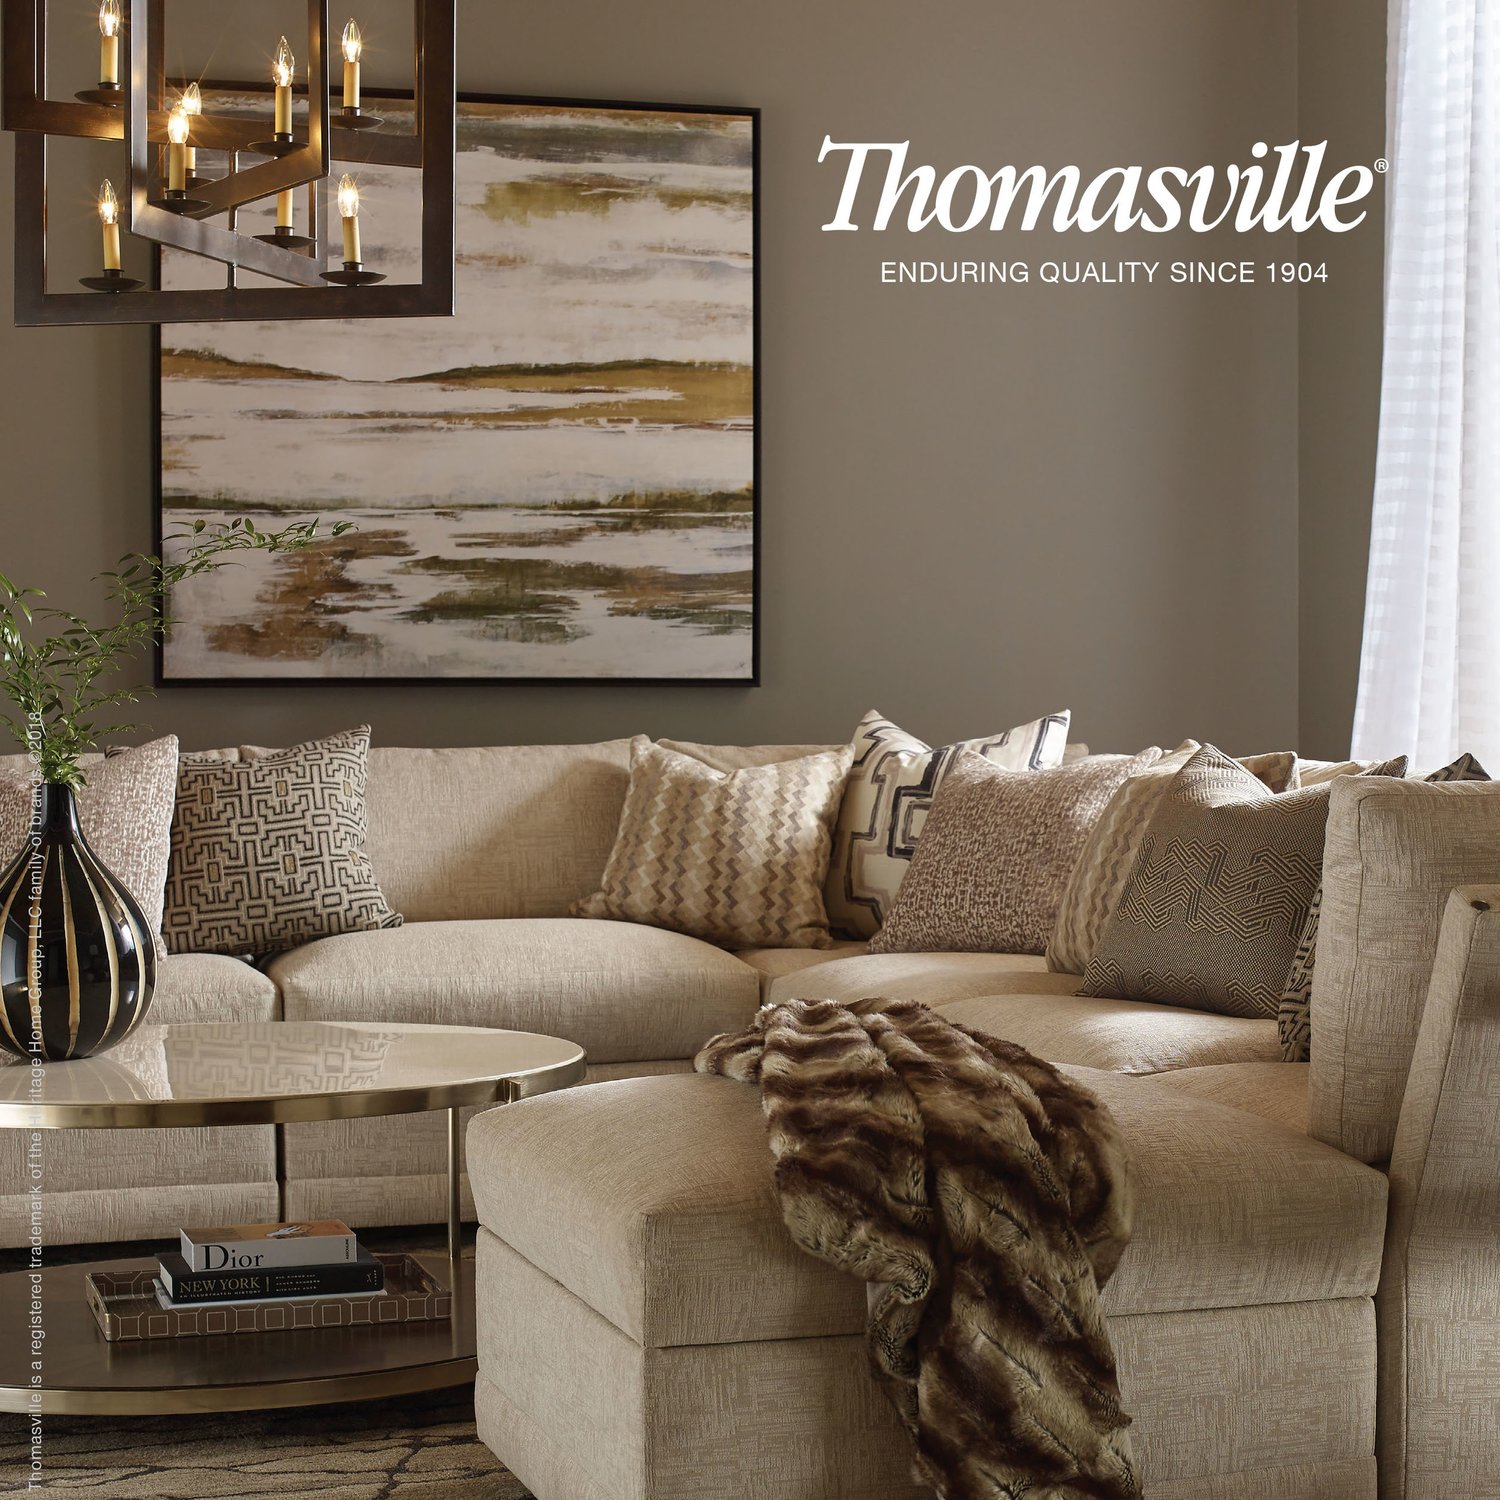 Thomasville Partners With Living Style Group Authentic Brands Group